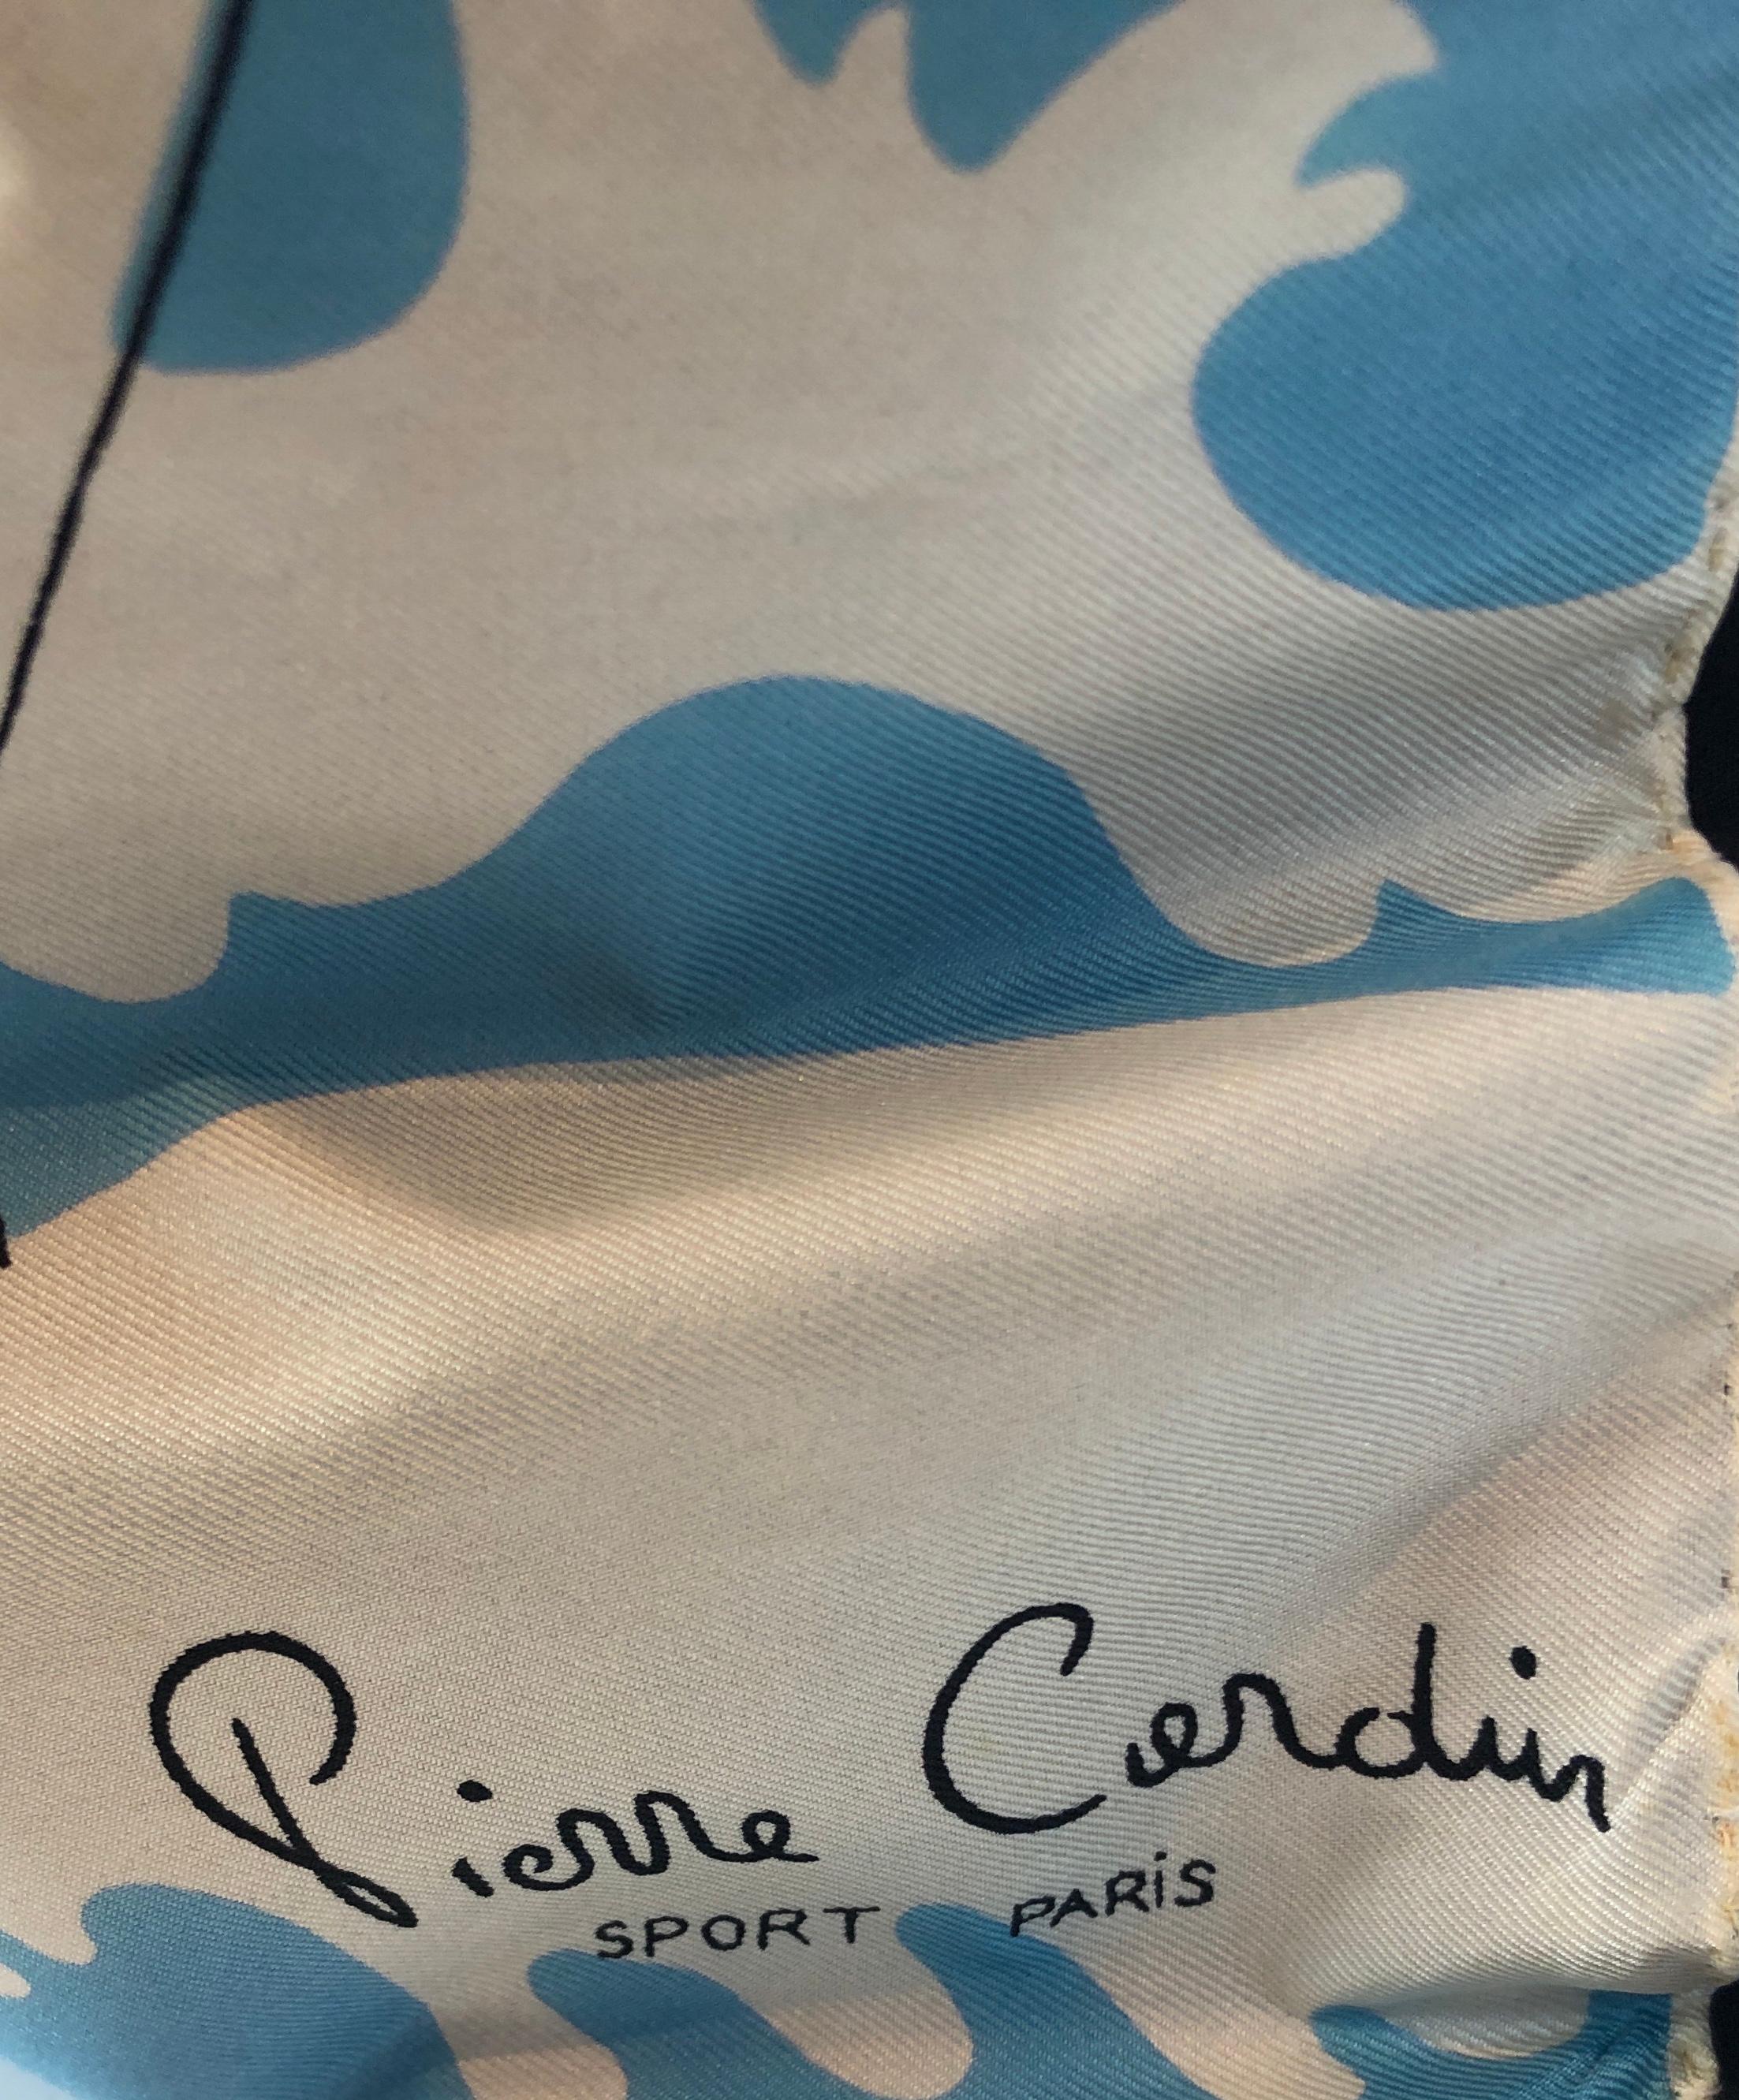 Offered is a Mid-Century Modern retro signed Pierre Cardin silk scarf with black cotton percale backing and poly fill pillow insert decorative pillow. The scarf reflects a modern depiction of early 20th century female swimmers. The light blue, black